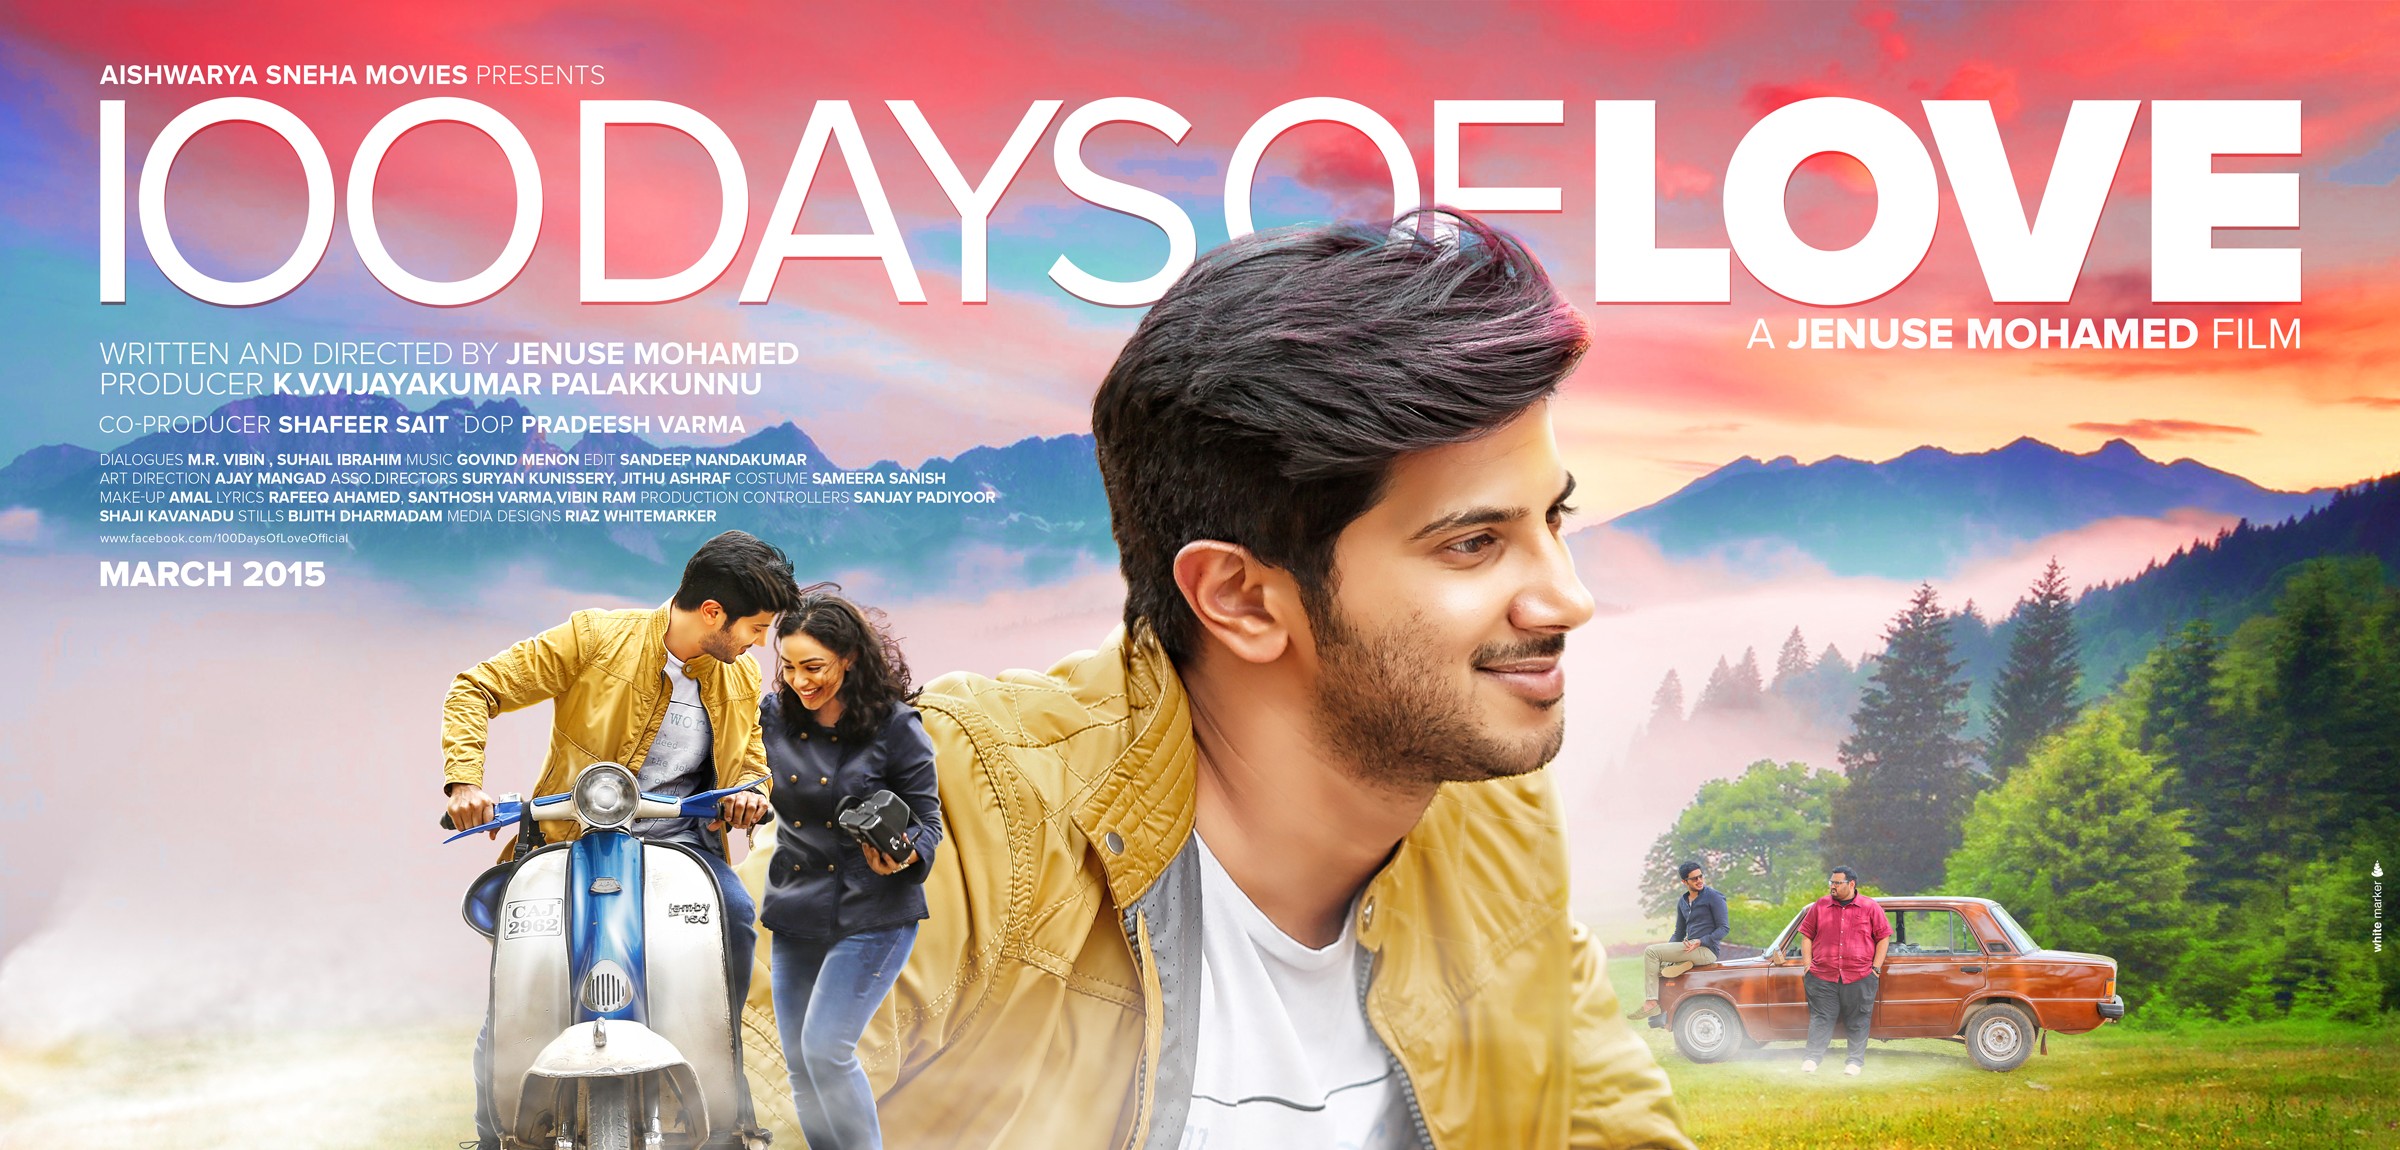 Mega Sized Movie Poster Image for 100 Days of Love (#7 of 8)